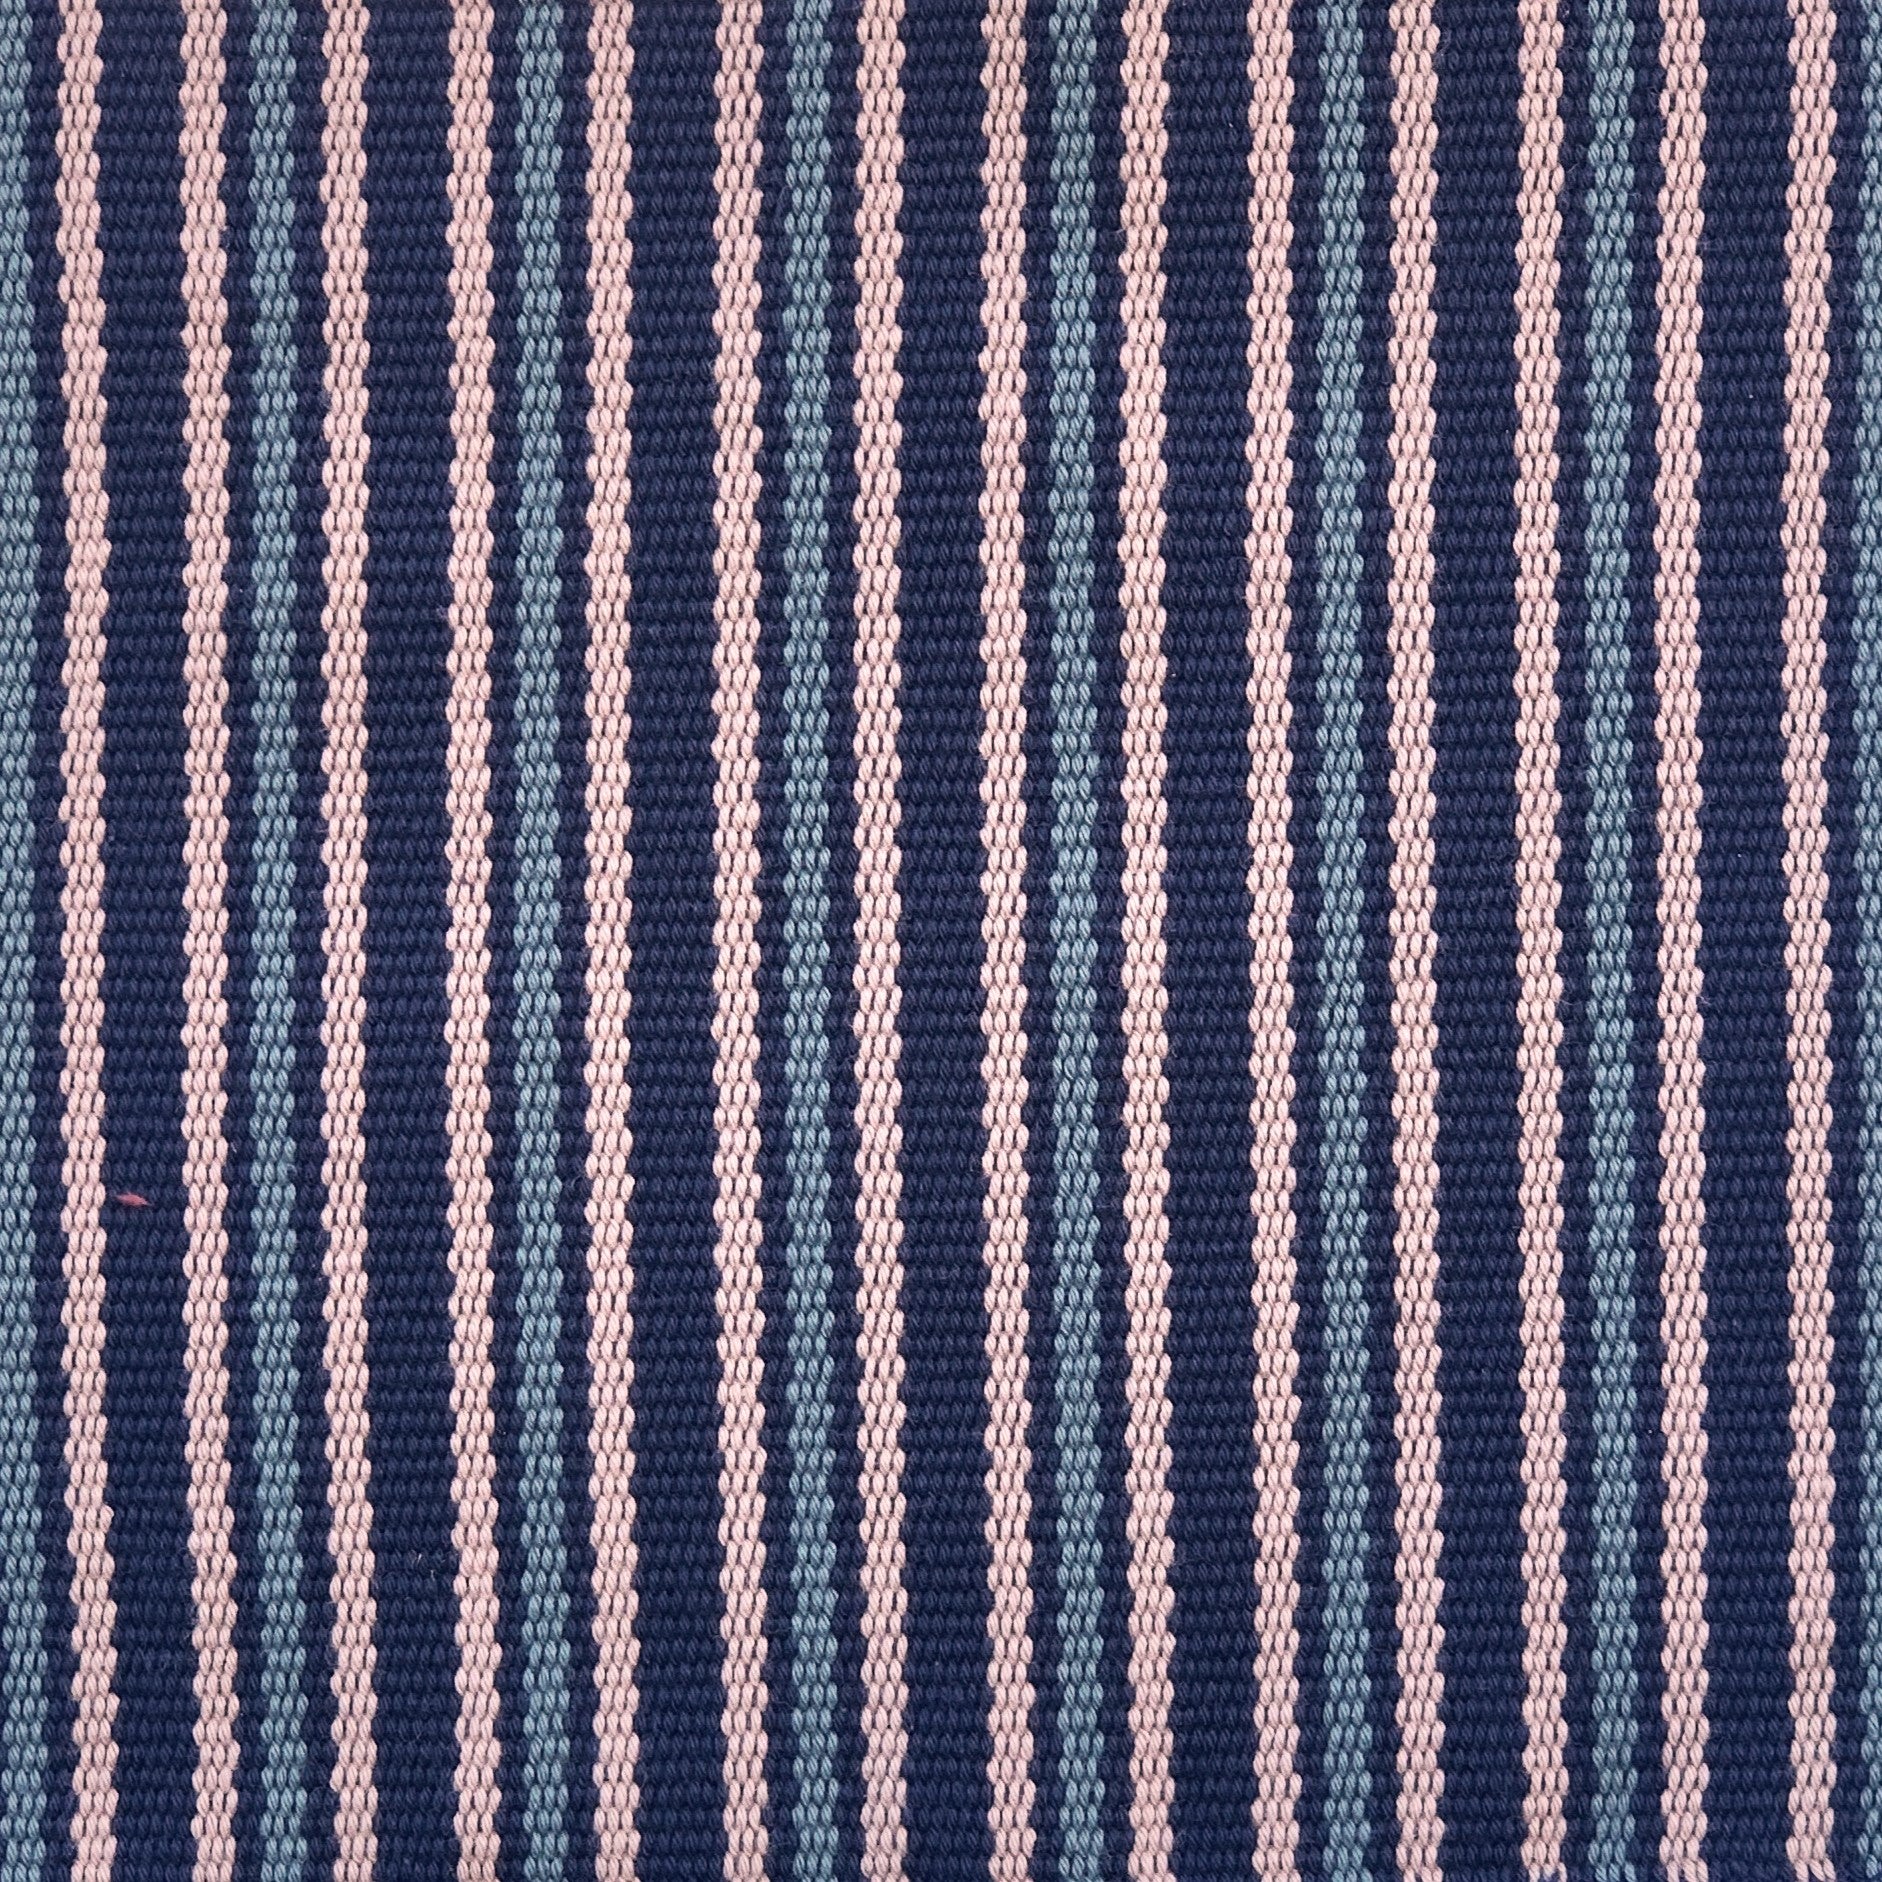 Detail of a hand-woven cotton fabric in a stripe pattern in shades of purple, pink and blue.